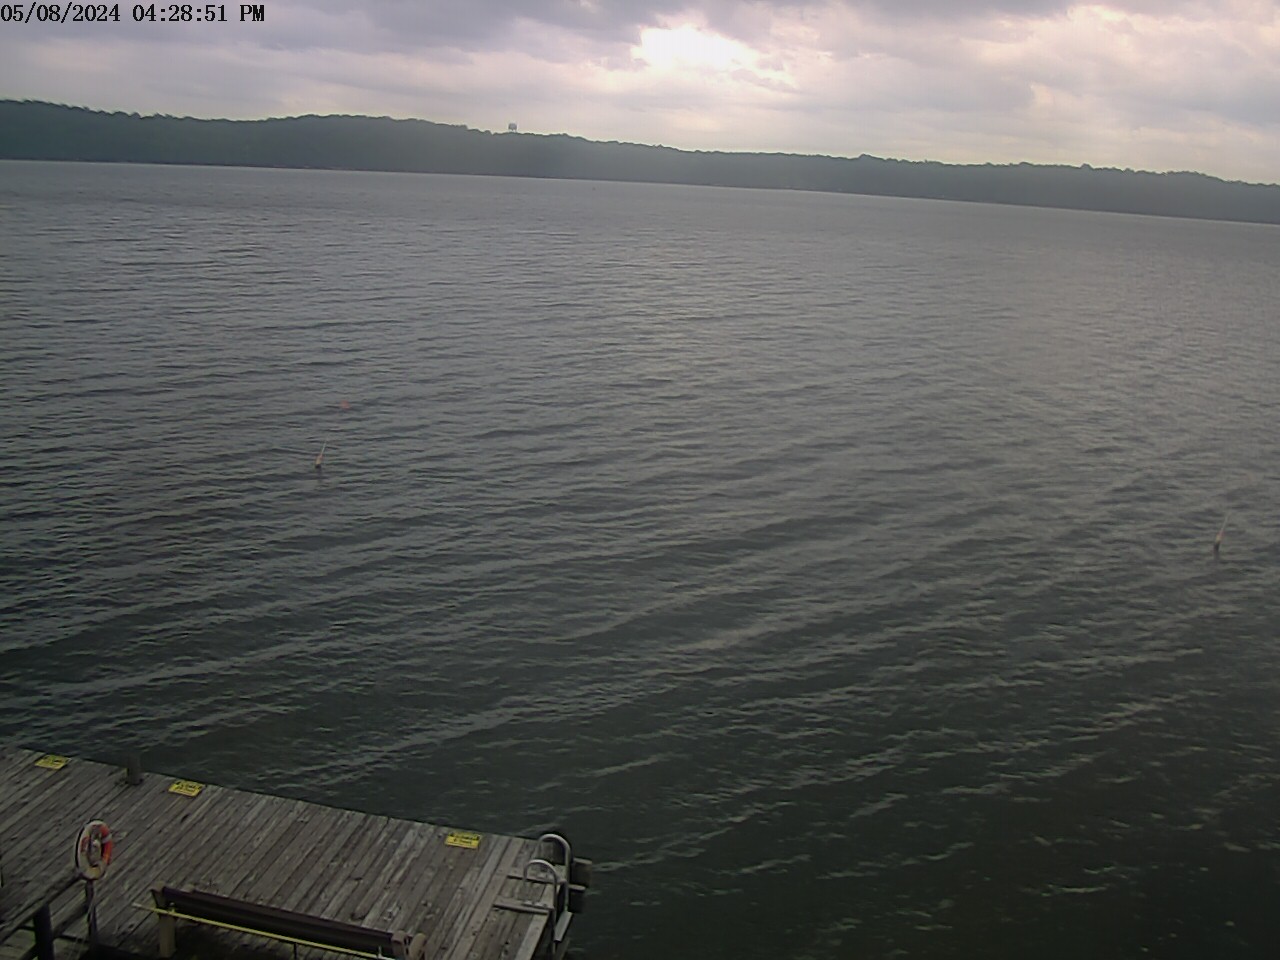 IP cam located at Privateer Yacht Club on Lake Chickamauga in Hixson, TN